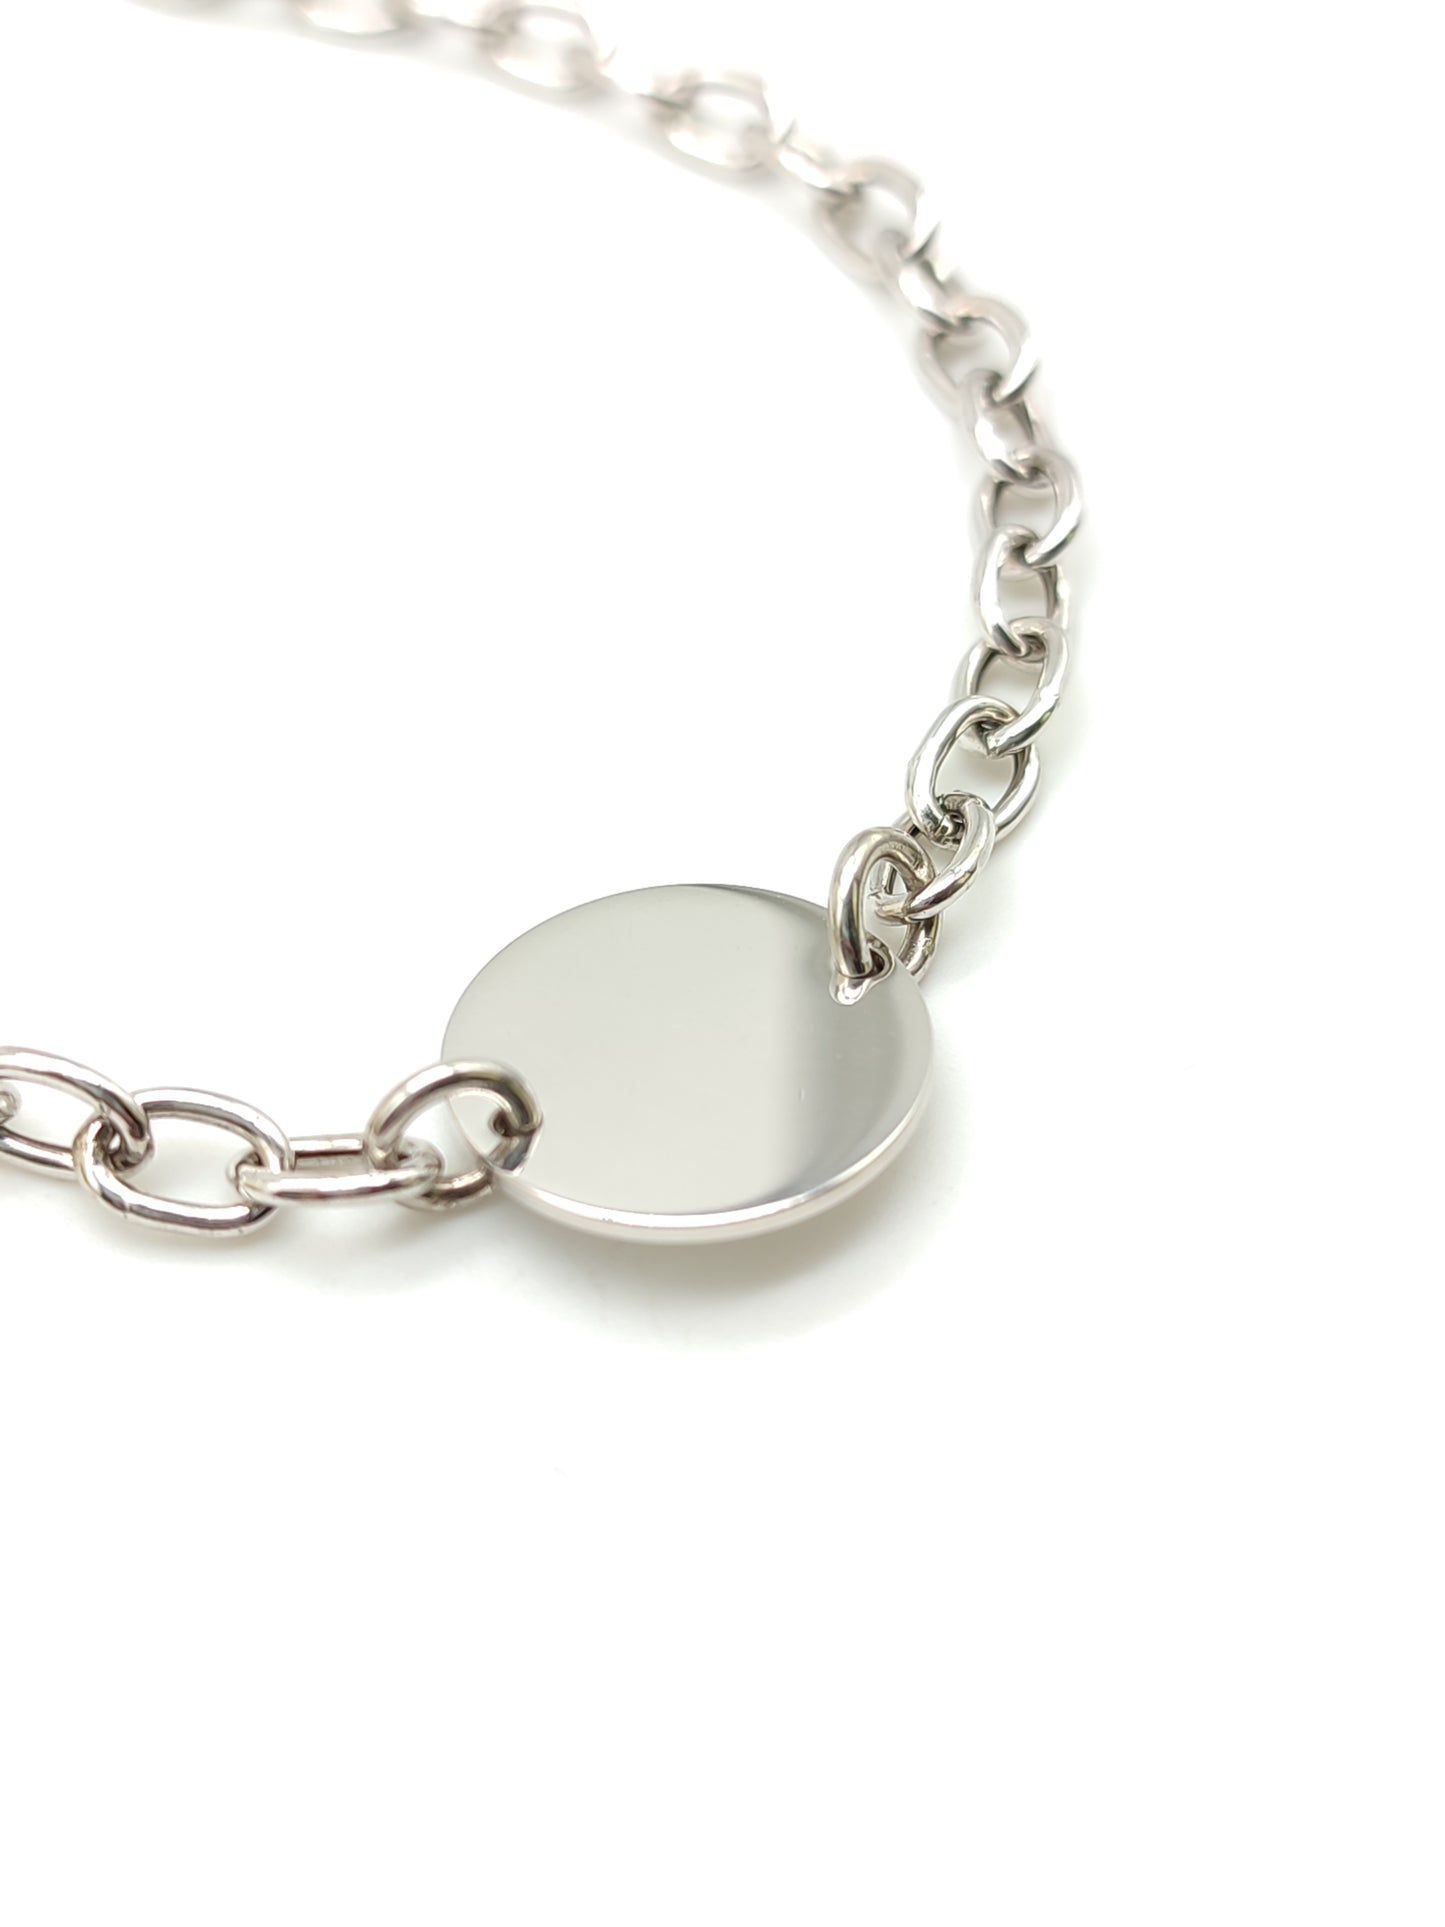 Silver bracelet with round button for engraving